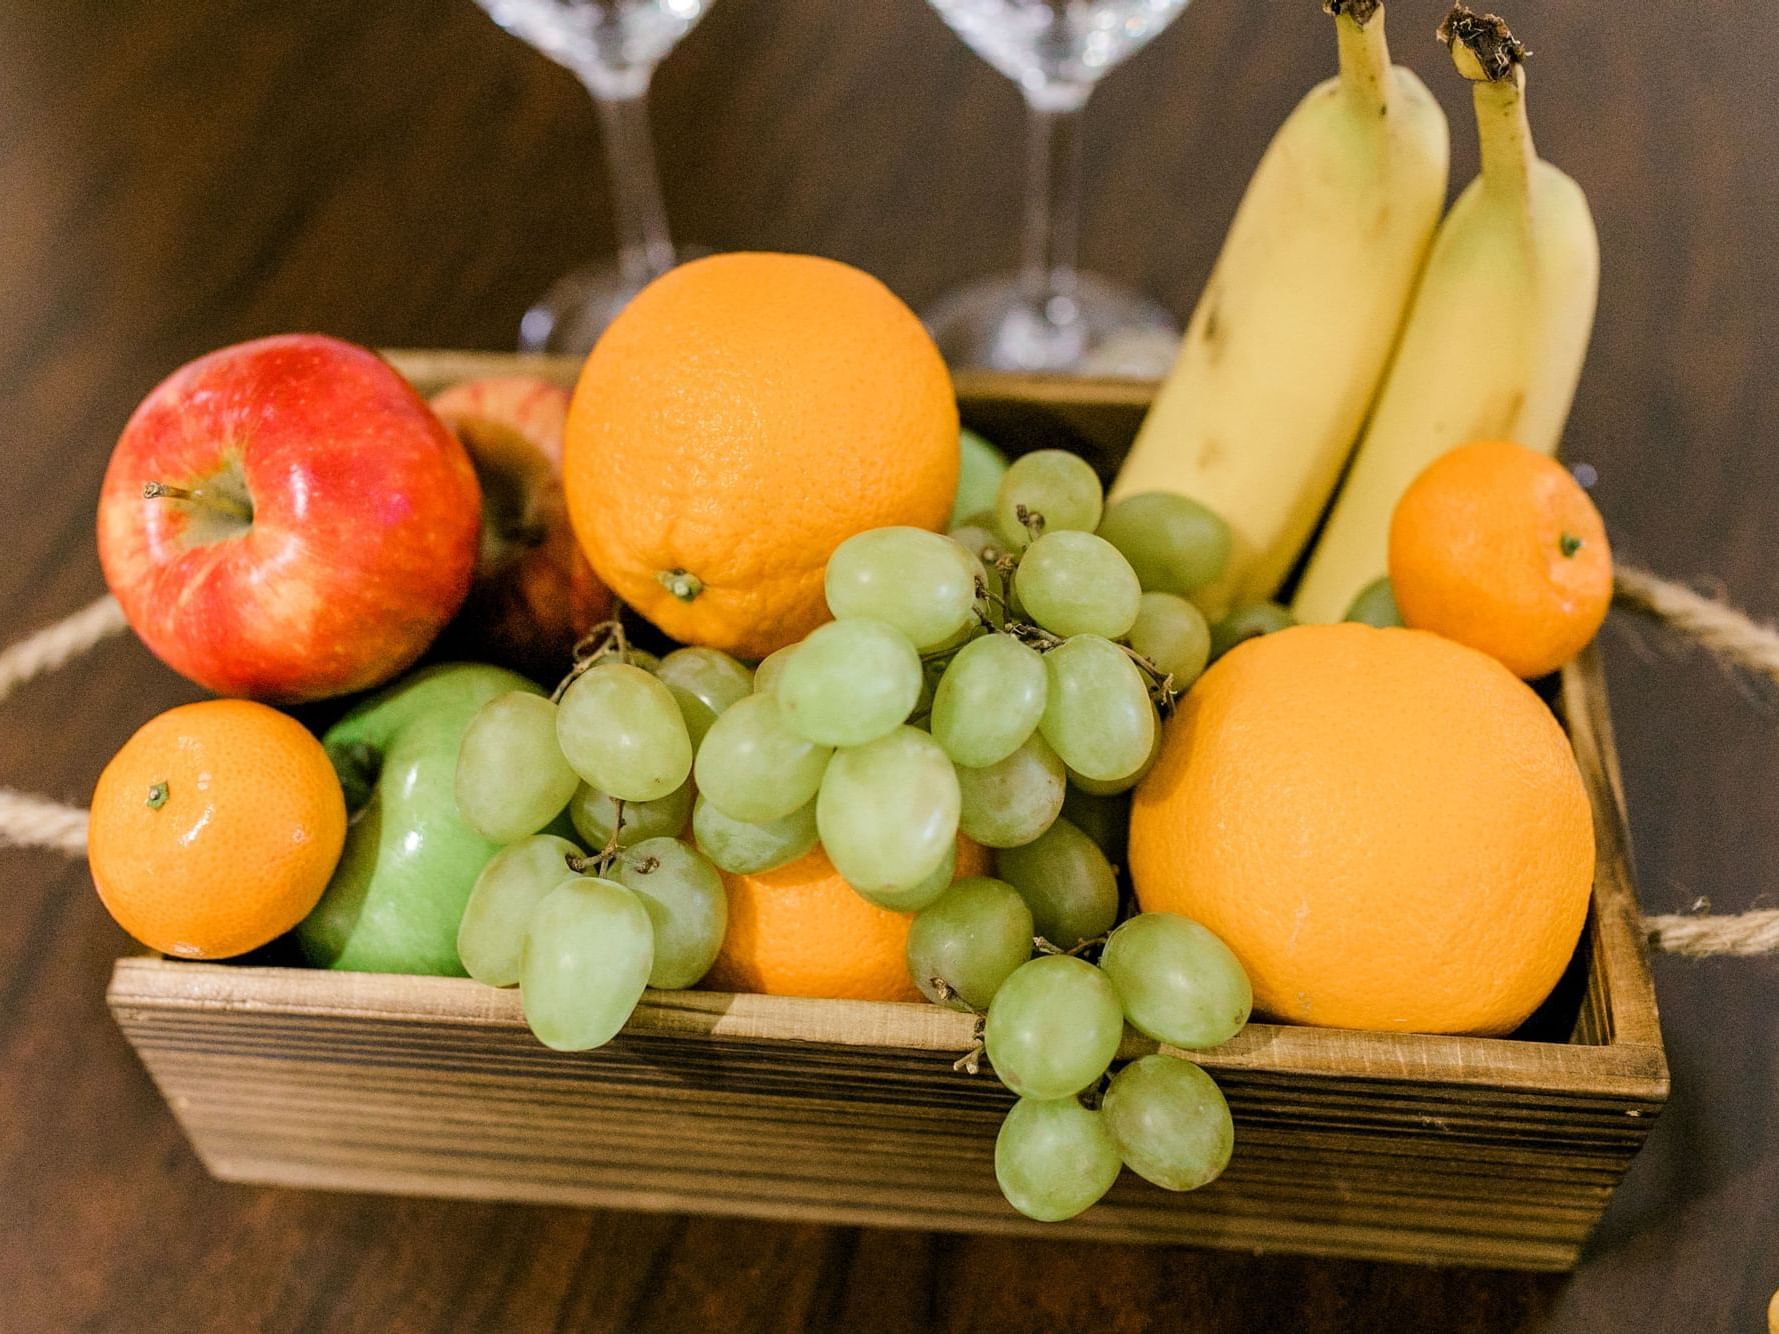 basket of fruit and wine glasses on table